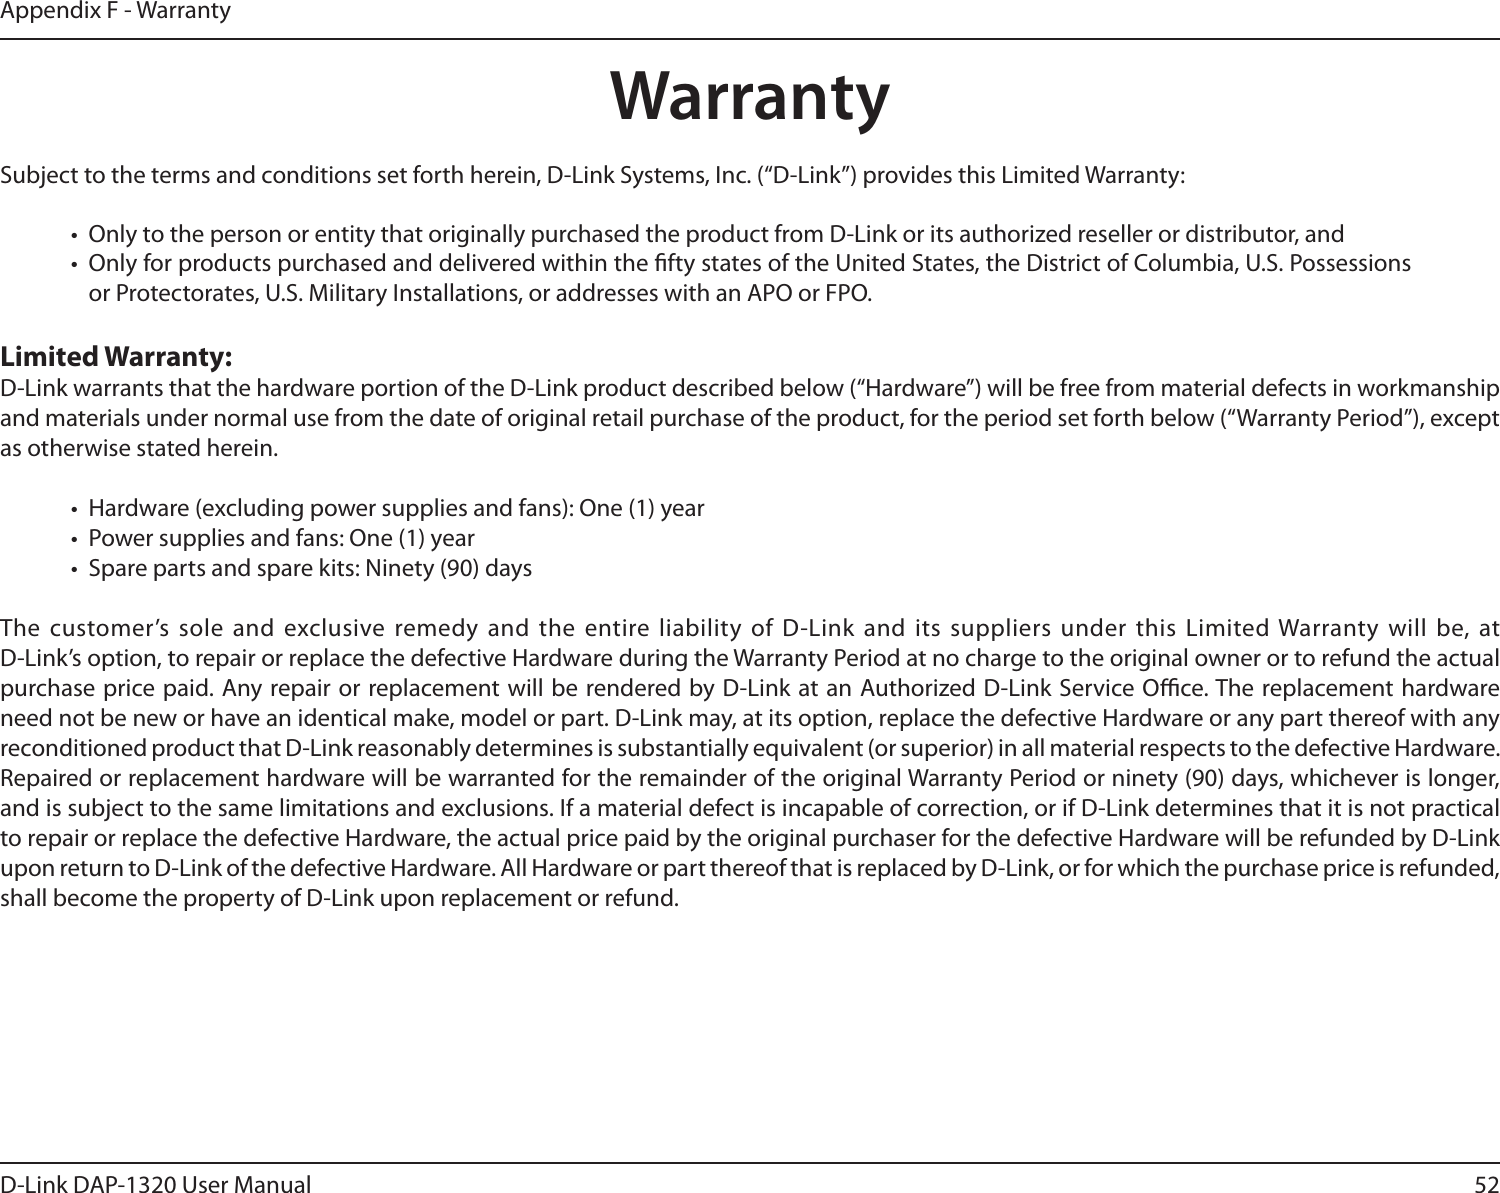 52D-Link DAP-1320 User ManualAppendix F - WarrantyWarrantySubject to the terms and conditions set forth herein, D-Link Systems, Inc. (“D-Link”) provides this Limited Warranty:•  Only to the person or entity that originally purchased the product from D-Link or its authorized reseller or distributor, and•  Only for products purchased and delivered within the fty states of the United States, the District of Columbia, U.S. Possessions or Protectorates, U.S. Military Installations, or addresses with an APO or FPO.Limited Warranty:D-Link warrants that the hardware portion of the D-Link product described below (“Hardware”) will be free from material defects in workmanship and materials under normal use from the date of original retail purchase of the product, for the period set forth below (“Warranty Period”), except as otherwise stated herein.•  Hardware (excluding power supplies and fans): One (1) year•  Power supplies and fans: One (1) year•  Spare parts and spare kits: Ninety (90) daysThe customer’s  sole and  exclusive remedy and the  entire liability  of D-Link and its  suppliers under this  Limited Warranty will  be, at  D-Link’s option, to repair or replace the defective Hardware during the Warranty Period at no charge to the original owner or to refund the actual purchase price paid. Any repair or replacement will be rendered by D-Link at an Authorized D-Link Service Oce. The replacement hardware need not be new or have an identical make, model or part. D-Link may, at its option, replace the defective Hardware or any part thereof with any reconditioned product that D-Link reasonably determines is substantially equivalent (or superior) in all material respects to the defective Hardware. Repaired or replacement hardware will be warranted for the remainder of the original Warranty Period or ninety (90) days, whichever is longer, and is subject to the same limitations and exclusions. If a material defect is incapable of correction, or if D-Link determines that it is not practical to repair or replace the defective Hardware, the actual price paid by the original purchaser for the defective Hardware will be refunded by D-Link upon return to D-Link of the defective Hardware. All Hardware or part thereof that is replaced by D-Link, or for which the purchase price is refunded, shall become the property of D-Link upon replacement or refund.